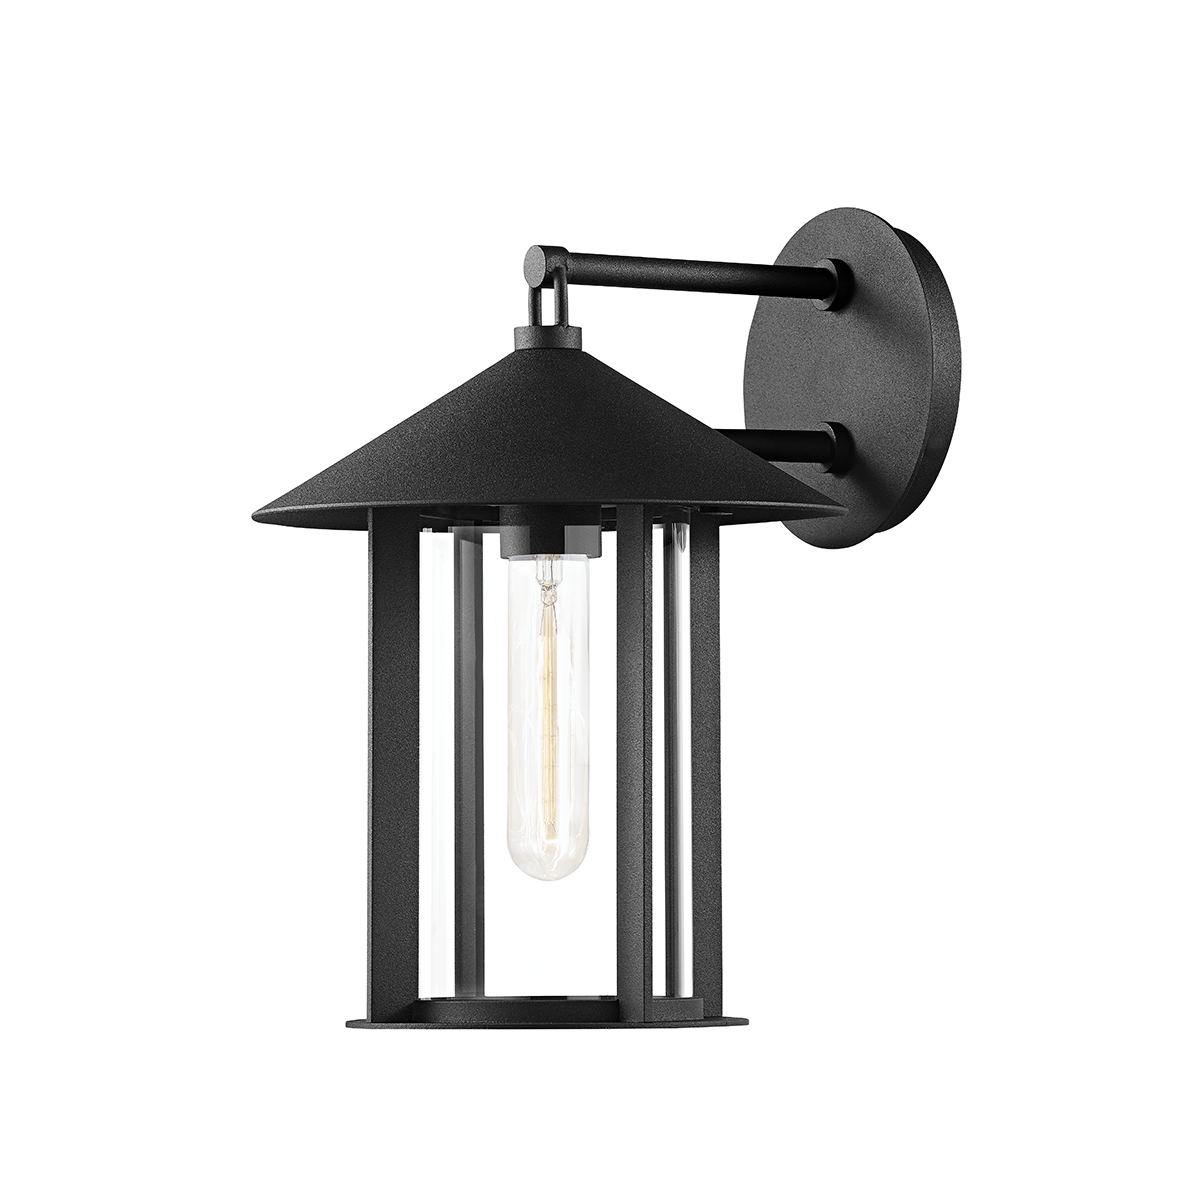 Troy LONG BEACH 1 LIGHT EXTERIOR WALL SCONCE B1951 Outdoor l Wall Troy Lighting TEXTURE BLACK  